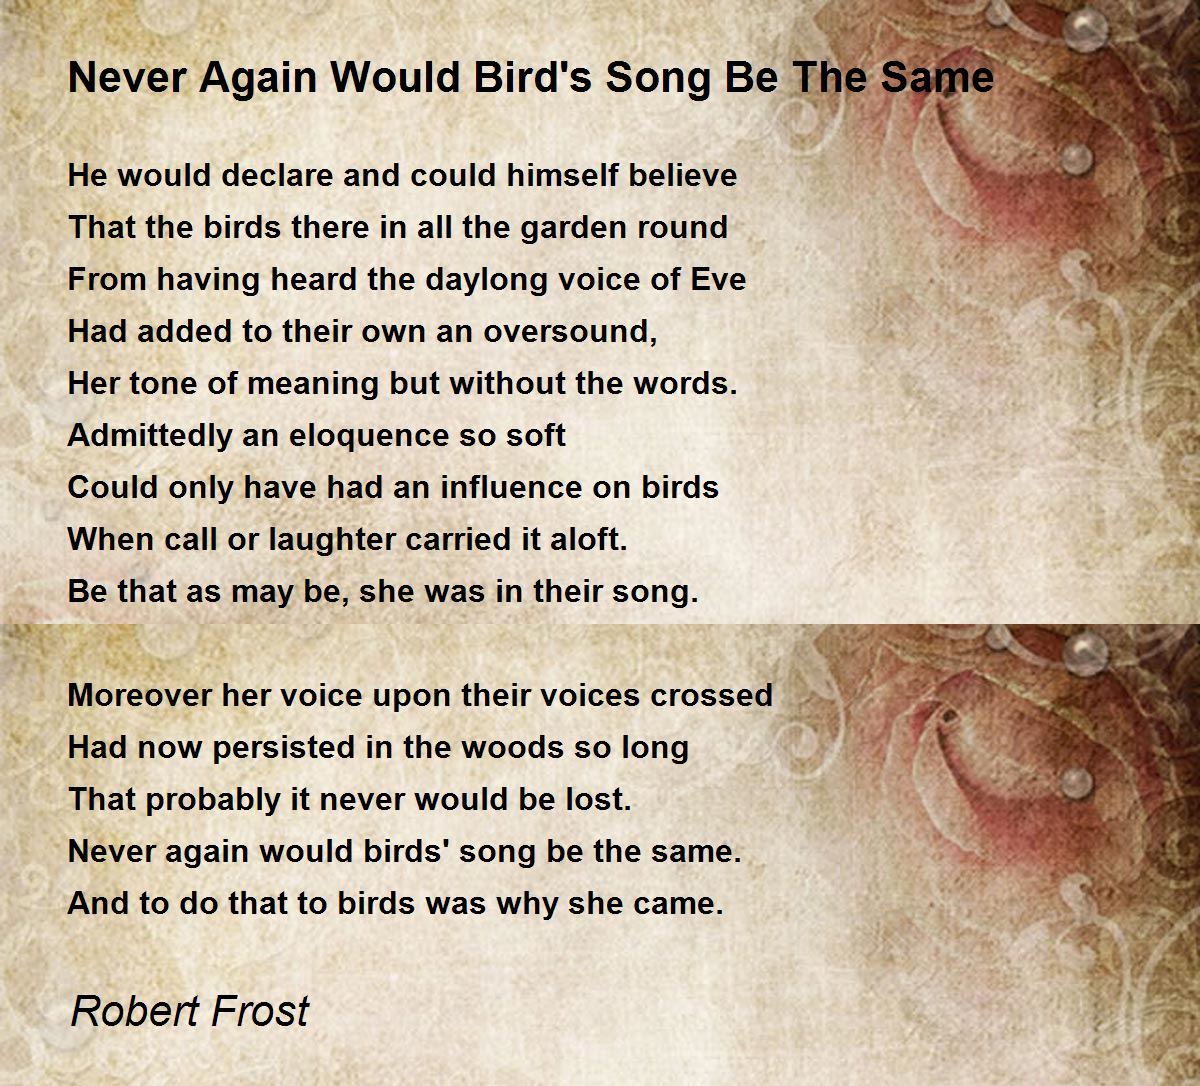 Never Again Would Bird's Song Be The Same Poem by Robert Frost - Poem